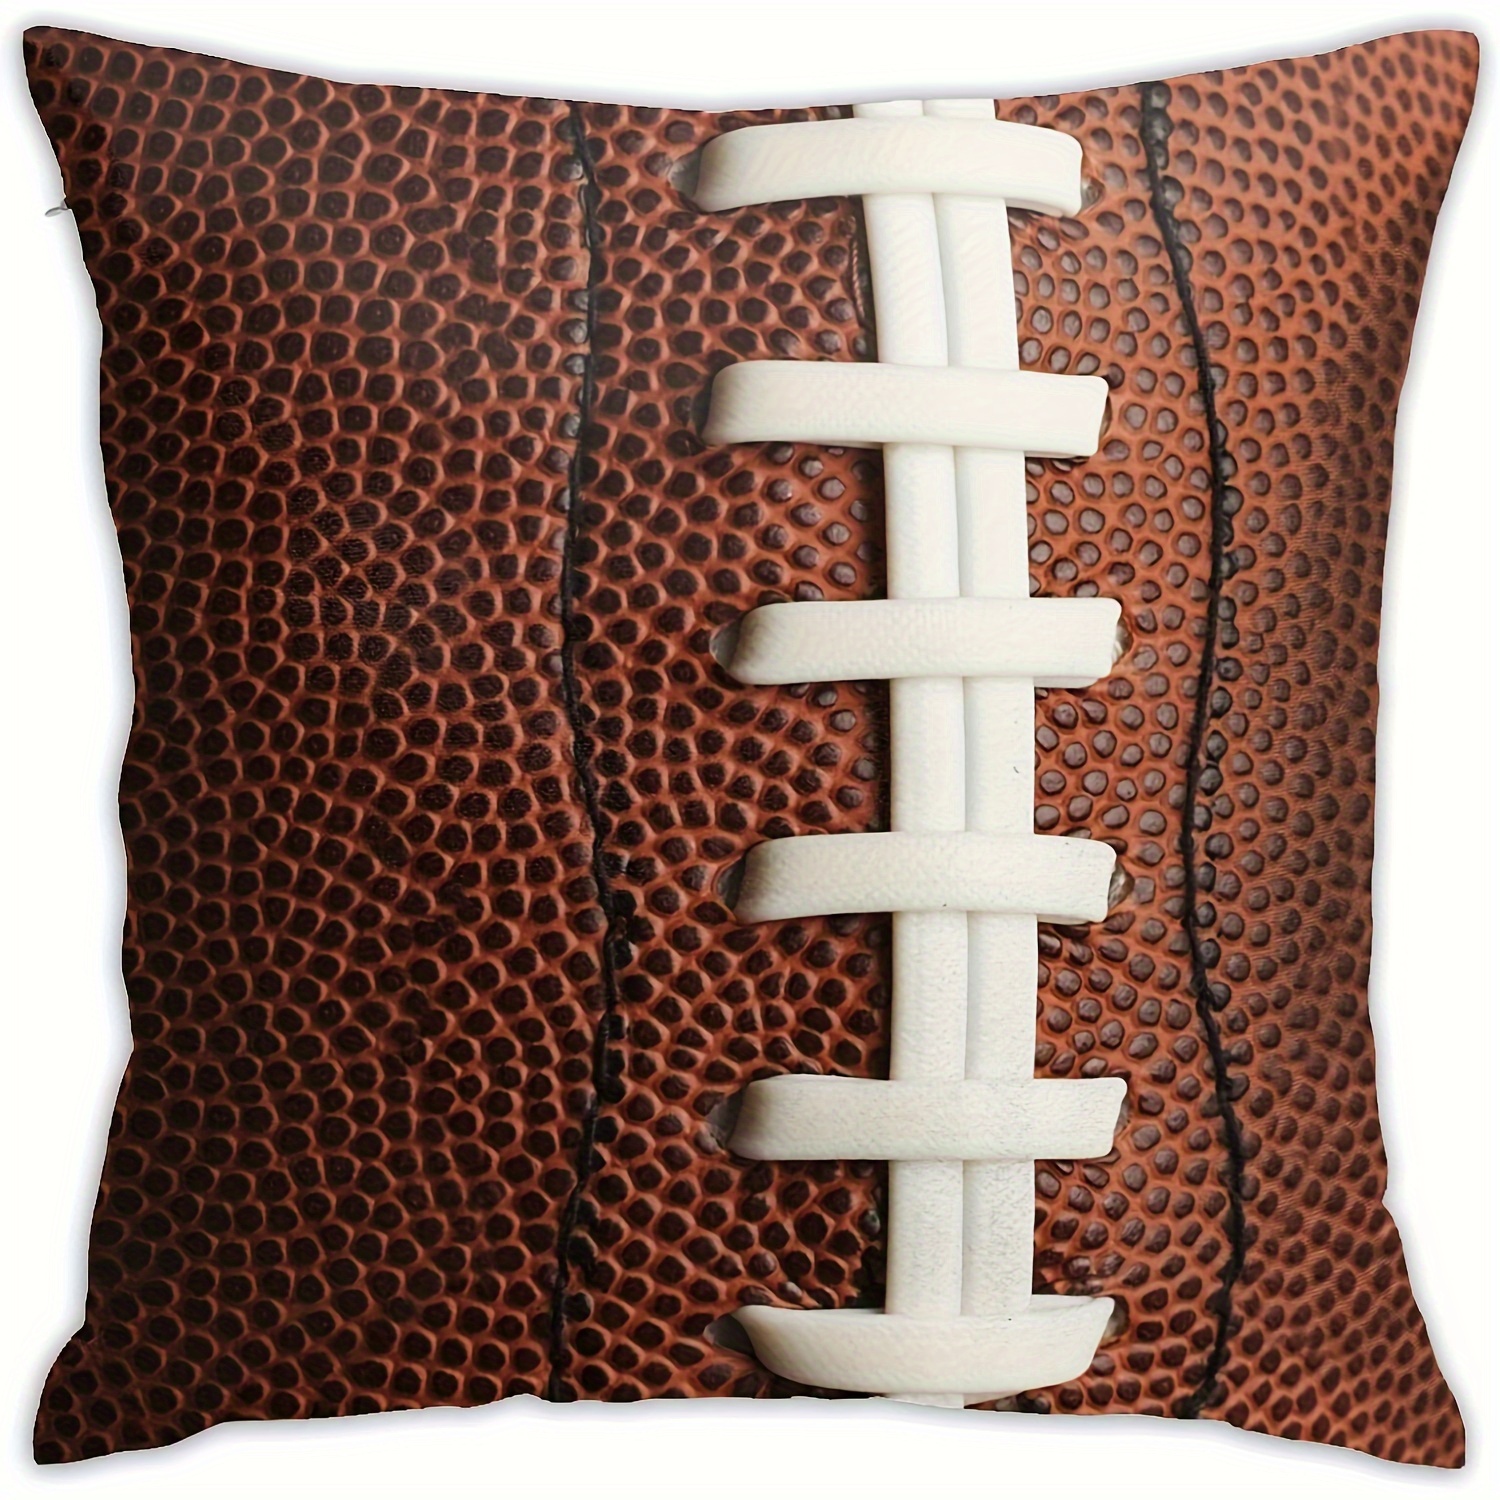 

1pc Football Throw Pillow Cover Cozy Square Throw Pillowcases Home Decoration For Bed Couch Sofa Living Room Cushion Case Gift Short Plush Decor 18 X 18 Inch (cushion Is Not Included)